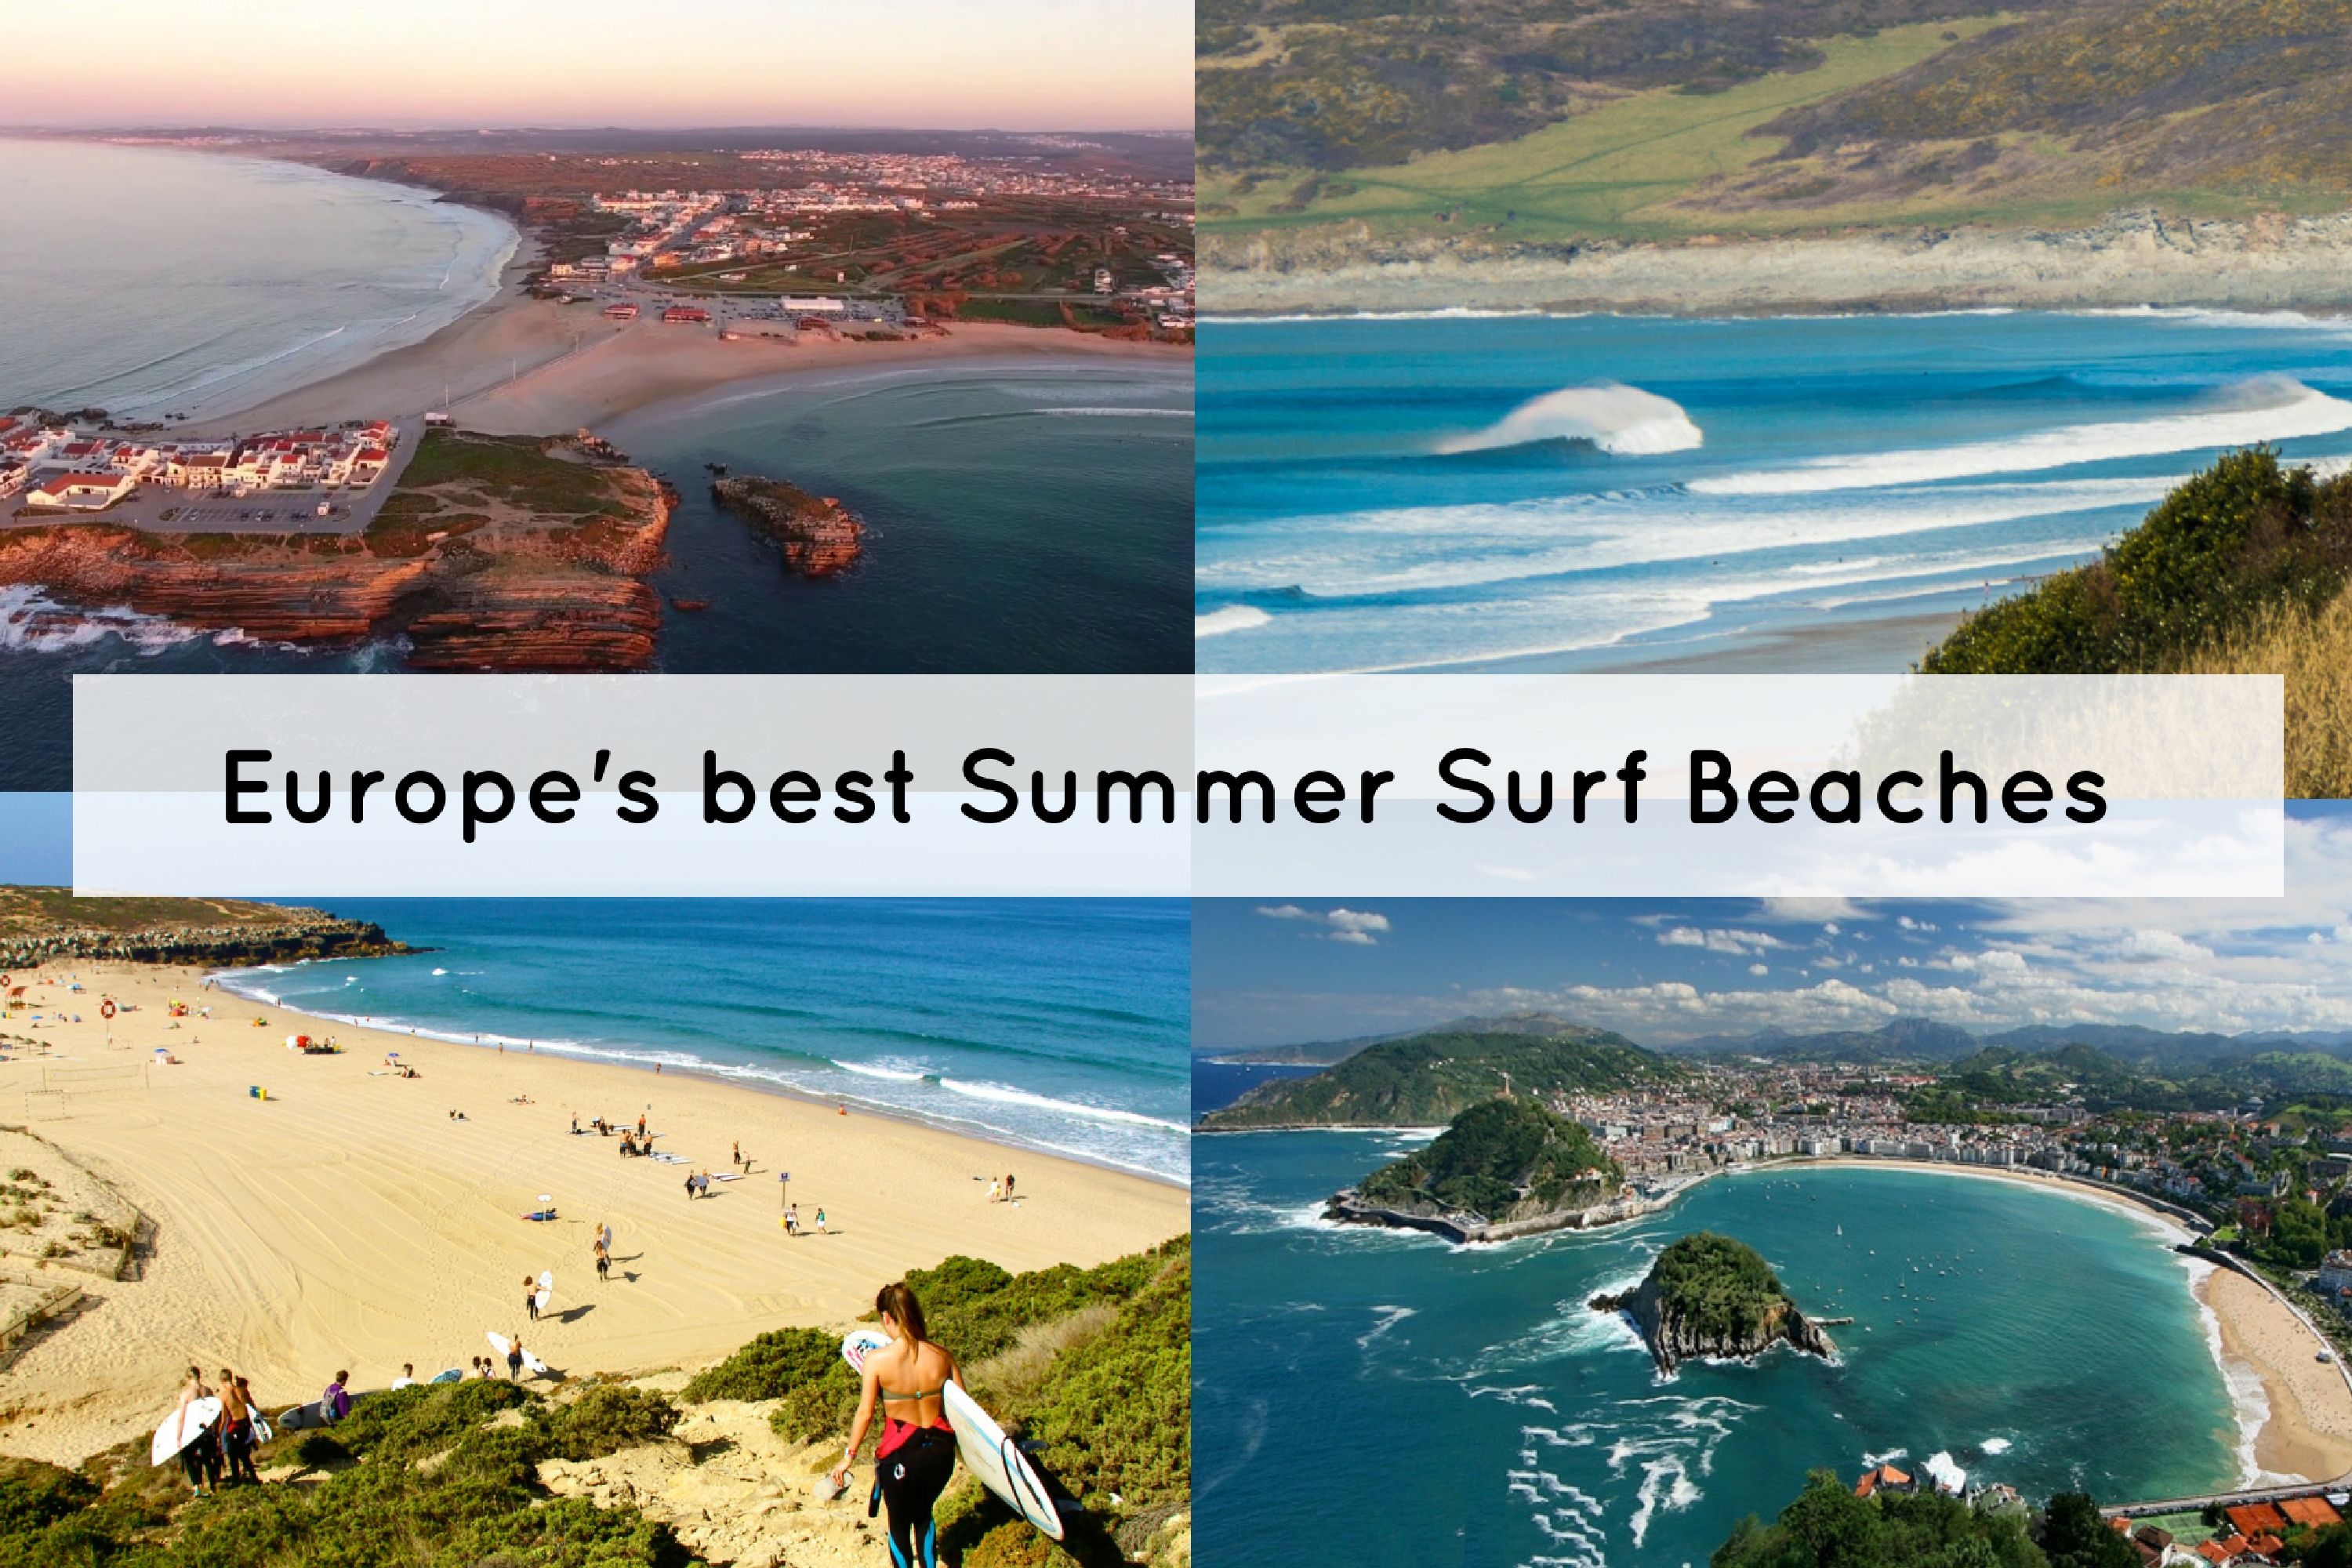 Top 5 Summer Surf Beaches in Europe